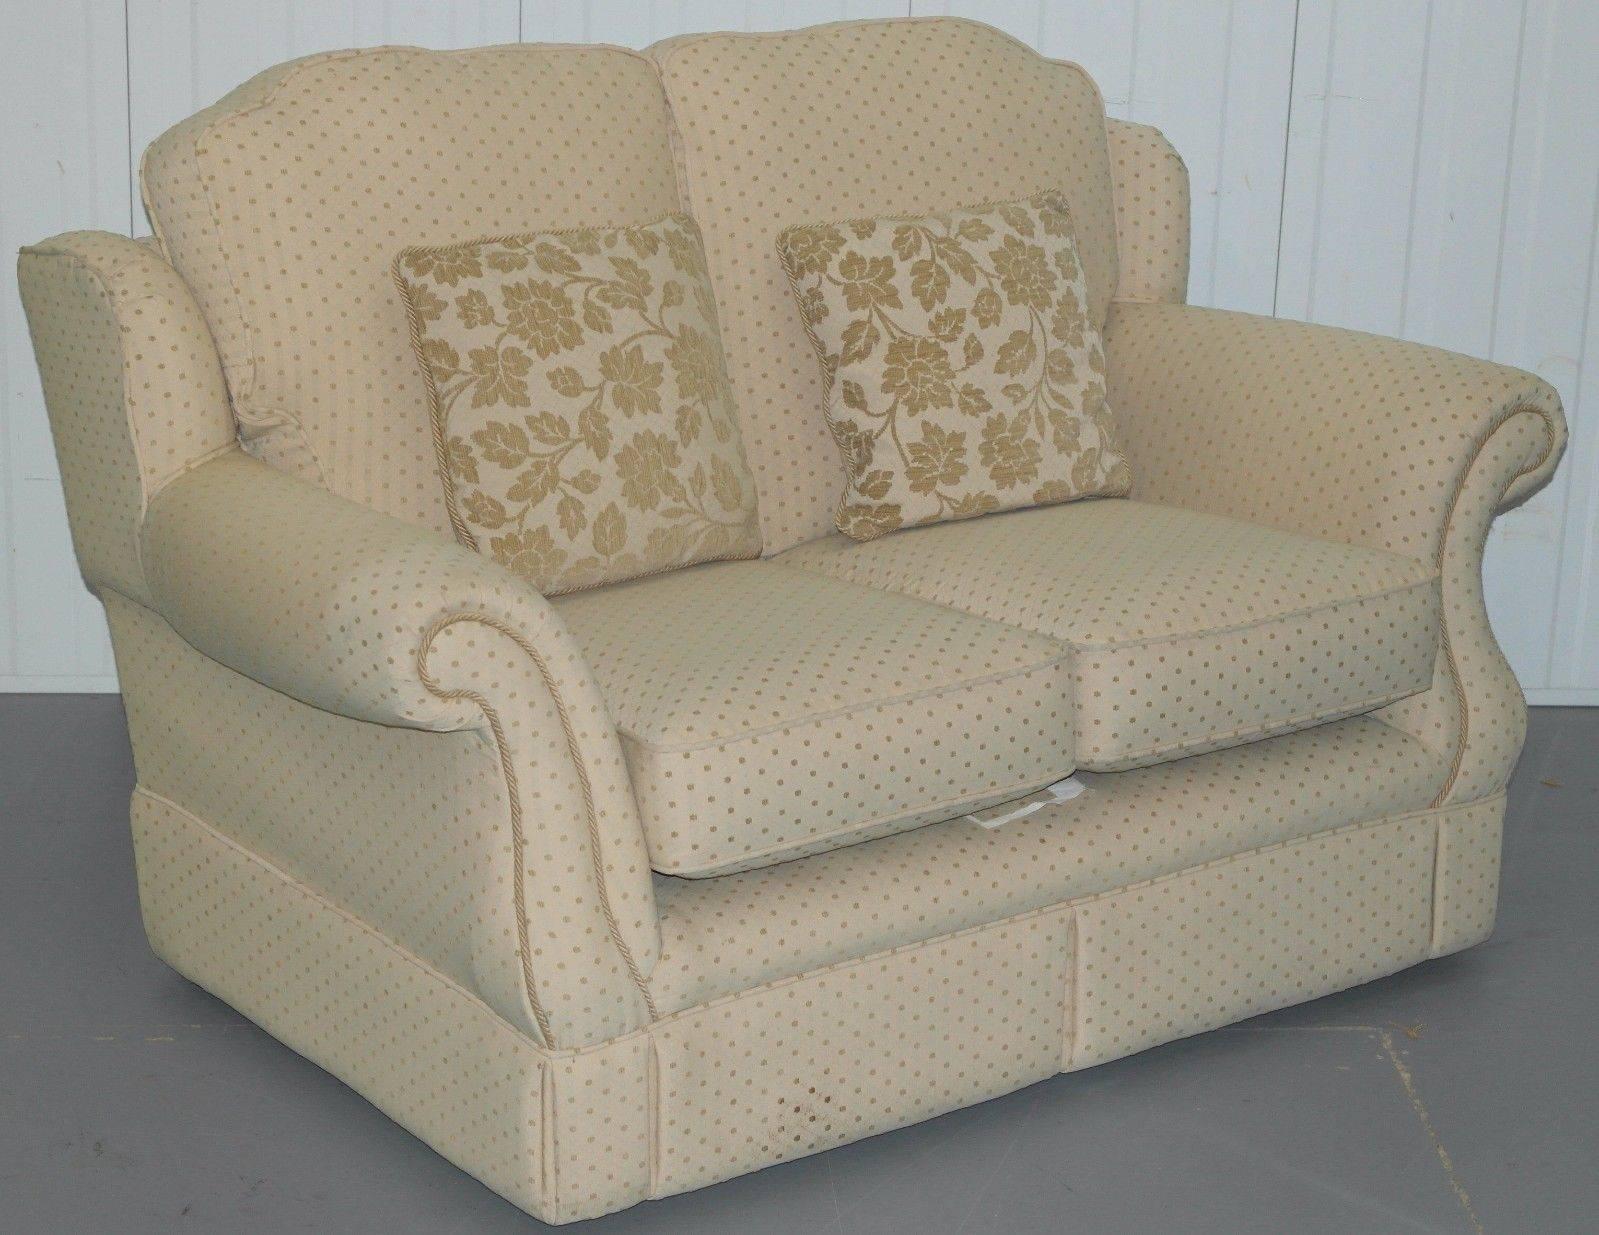 We are delighted to offer for sale this lovely little contemporary sofa and armchair suite

Both pieces are in good used condition and come with the original cushions and armchair covers which has sweet little tassels. The main body cushions are